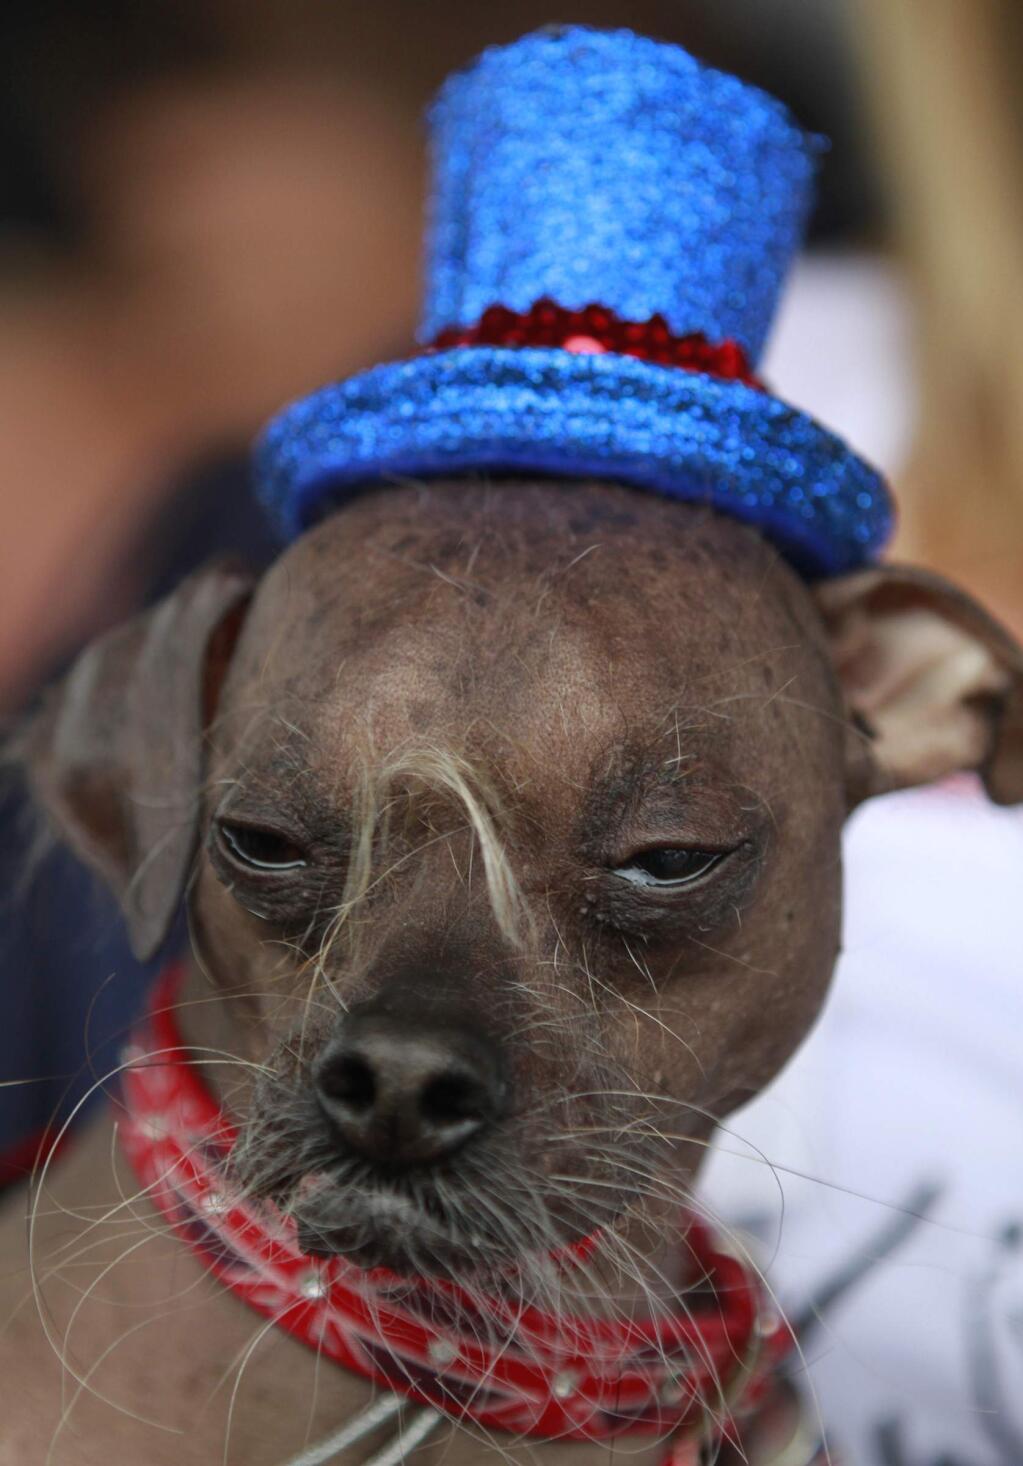 Mugly, a Chinese crested dog, owned by Bev Nicholson of Peterborough, England won the title of 'World's Ugliest Dog' at the Sonoma-Marin Fair in Petaluma, California, on Friday, June 22, 2012. (BETH SCHLANKER/ The Press Democrat)